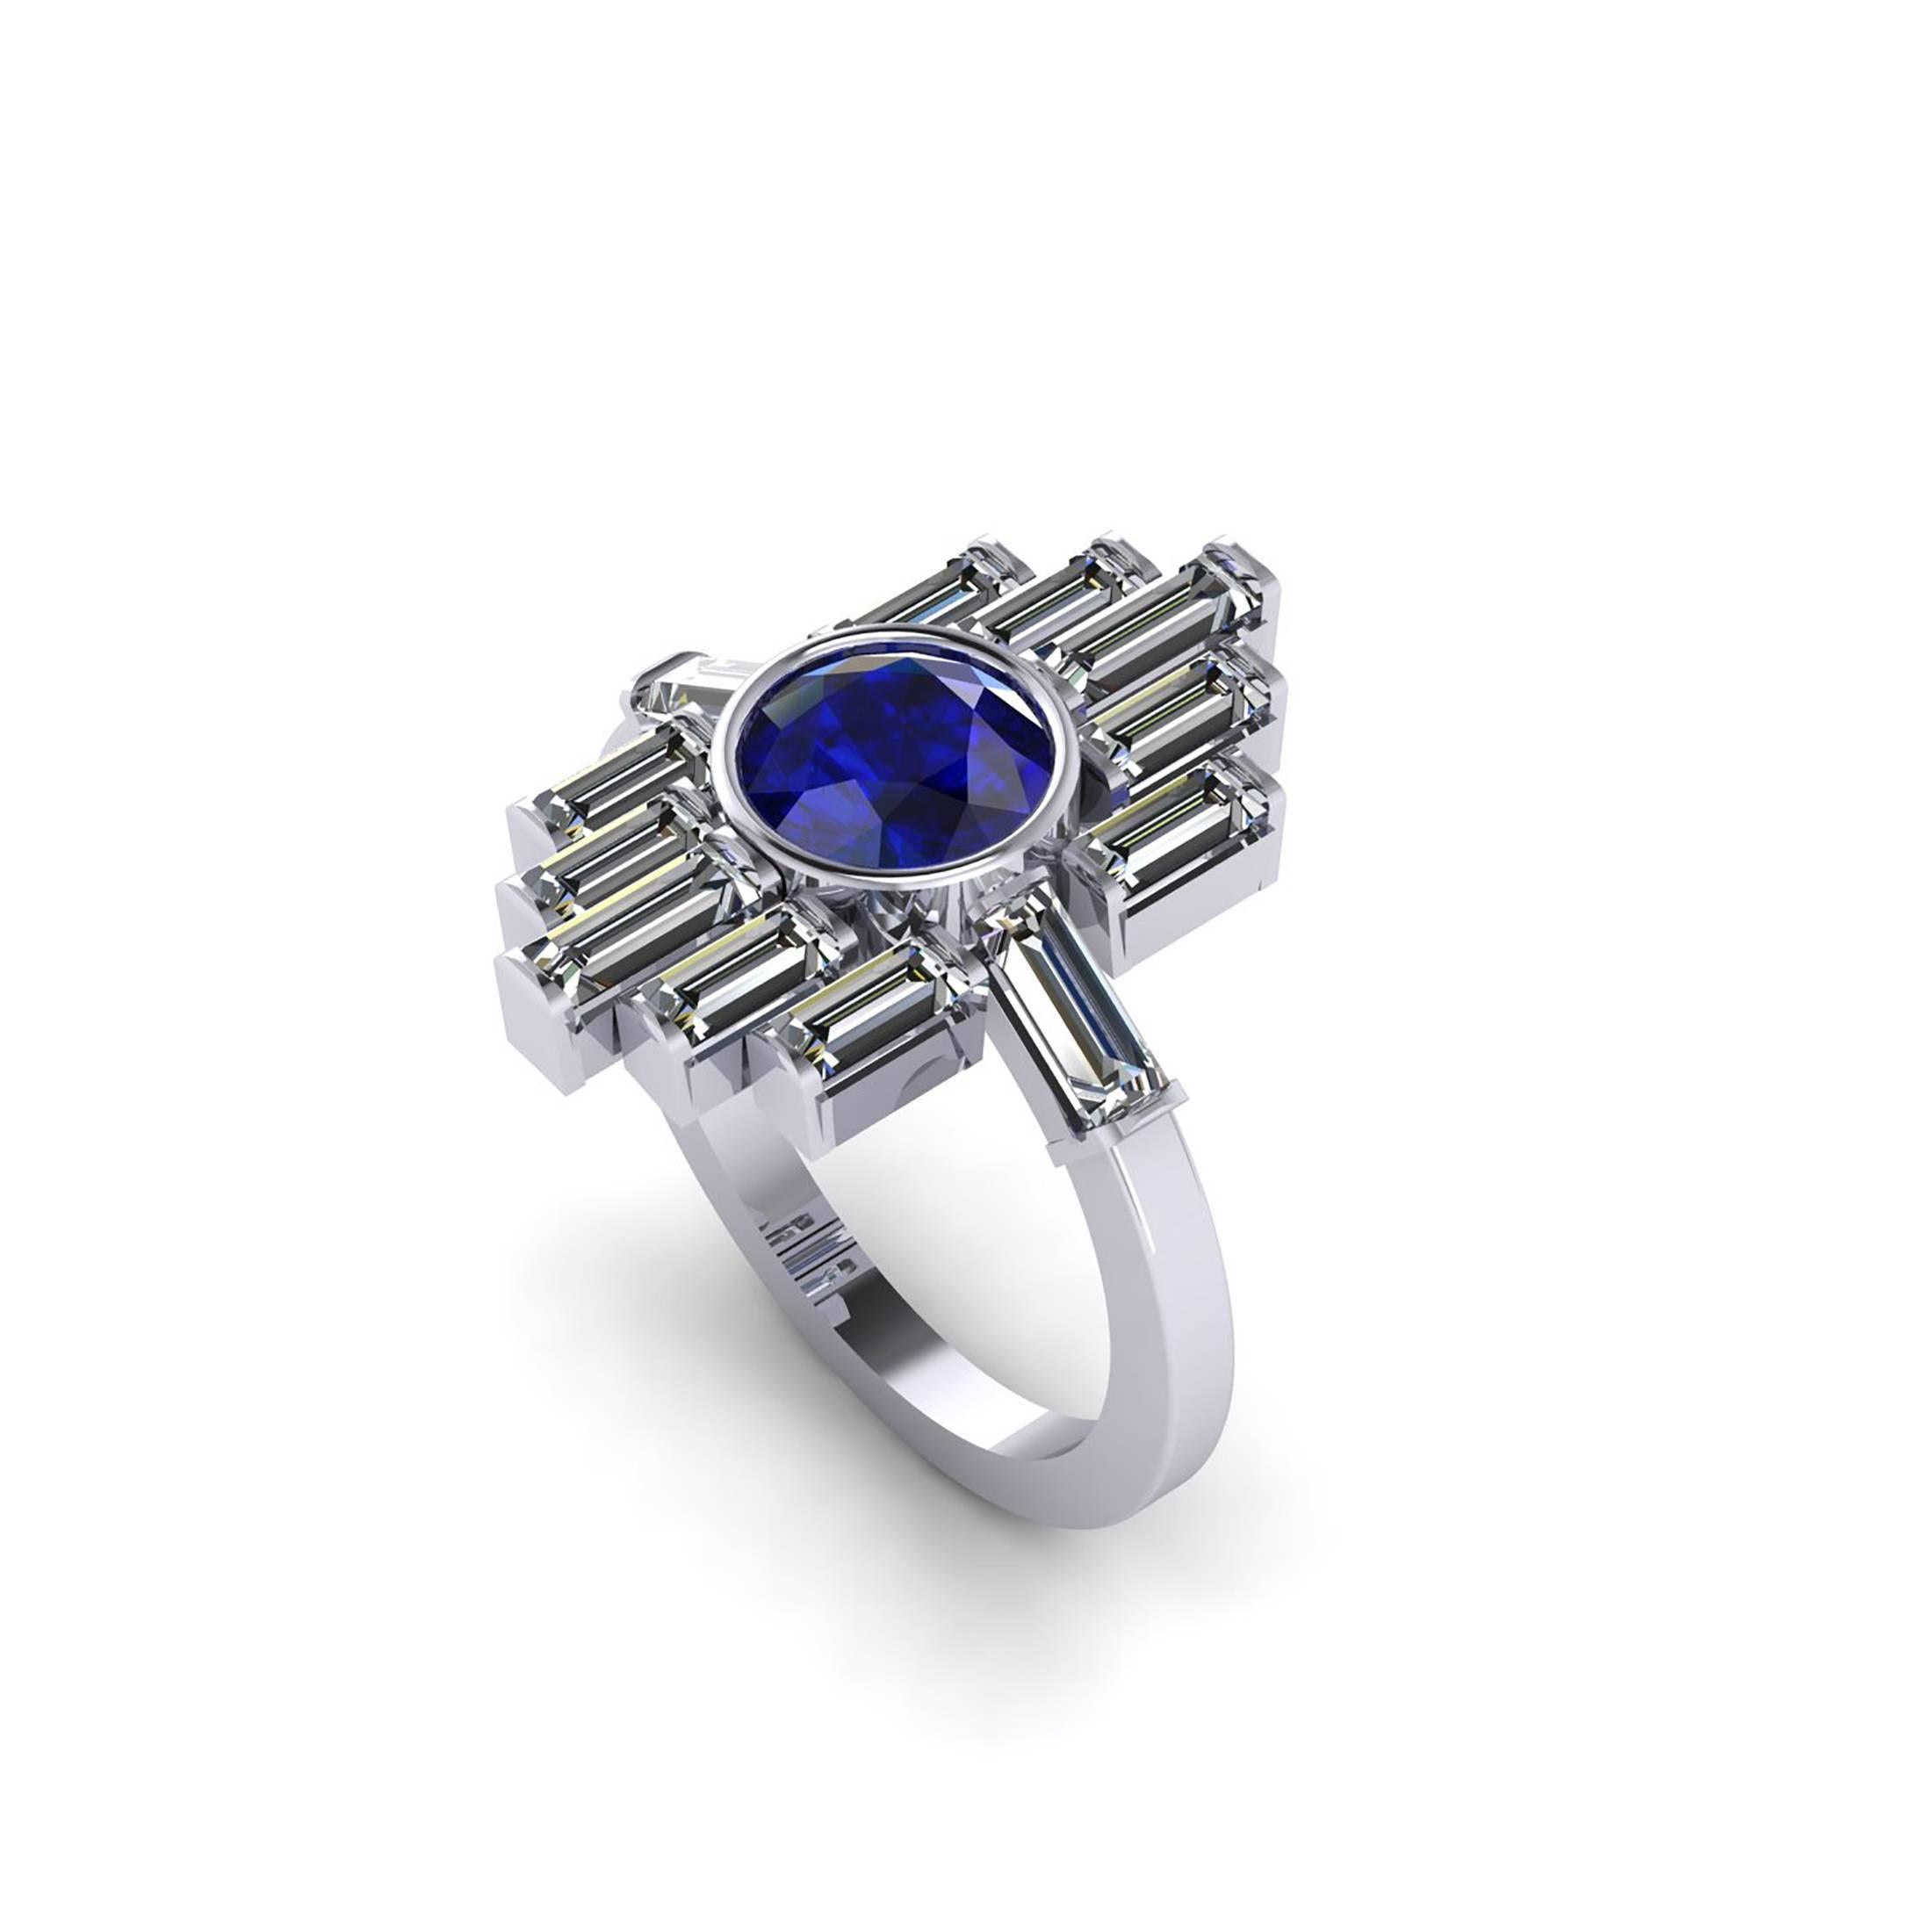 Ferrucci Art Deco design platinum Ring, hand made in New York by Italian master jeweler, showcasing a stunning  1.71 carats intense deep blue round natural Sapphire, embellished by bright white diamond baguettes for an approximate 1.65 carats, in a